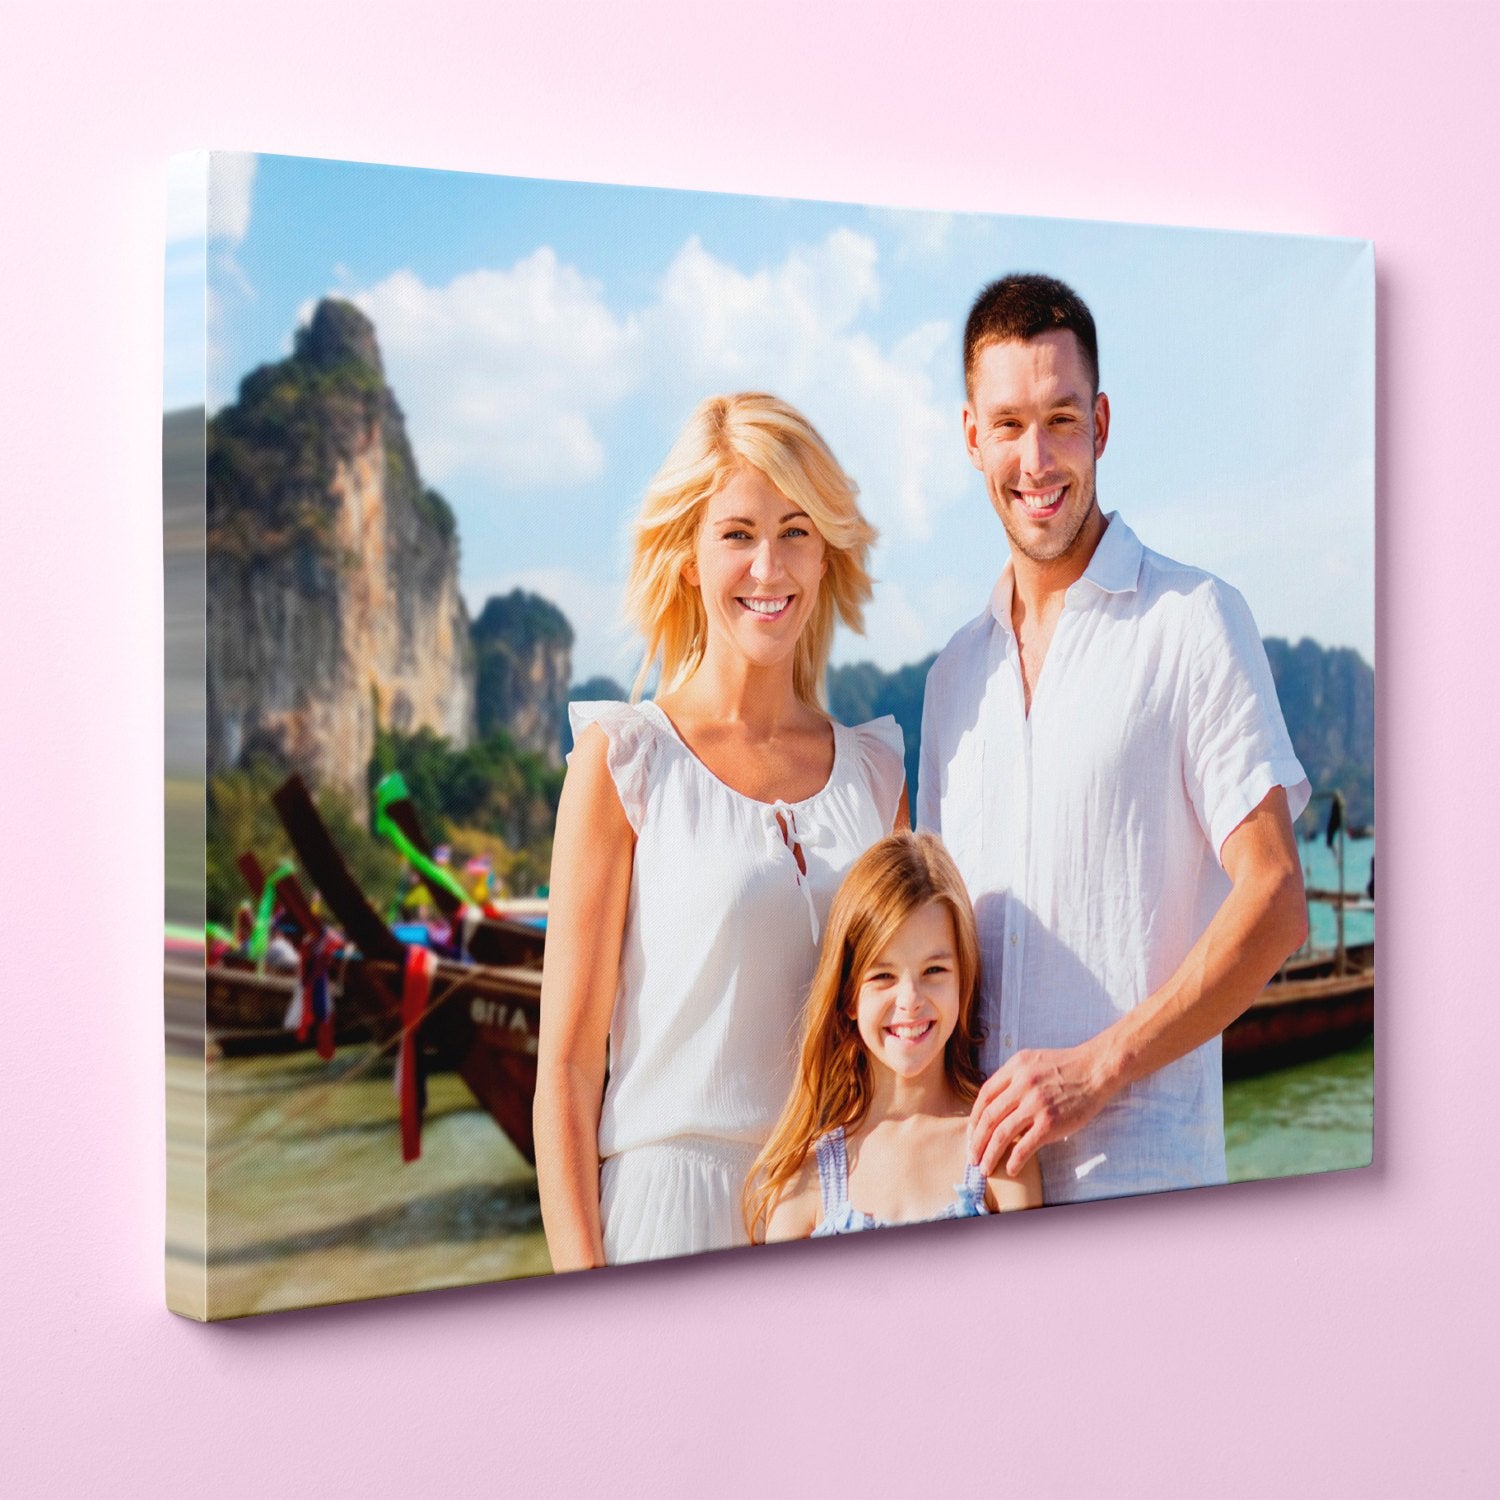 Personalized 24" x 36" Photo / Image Canvas Gallery Wrap Print